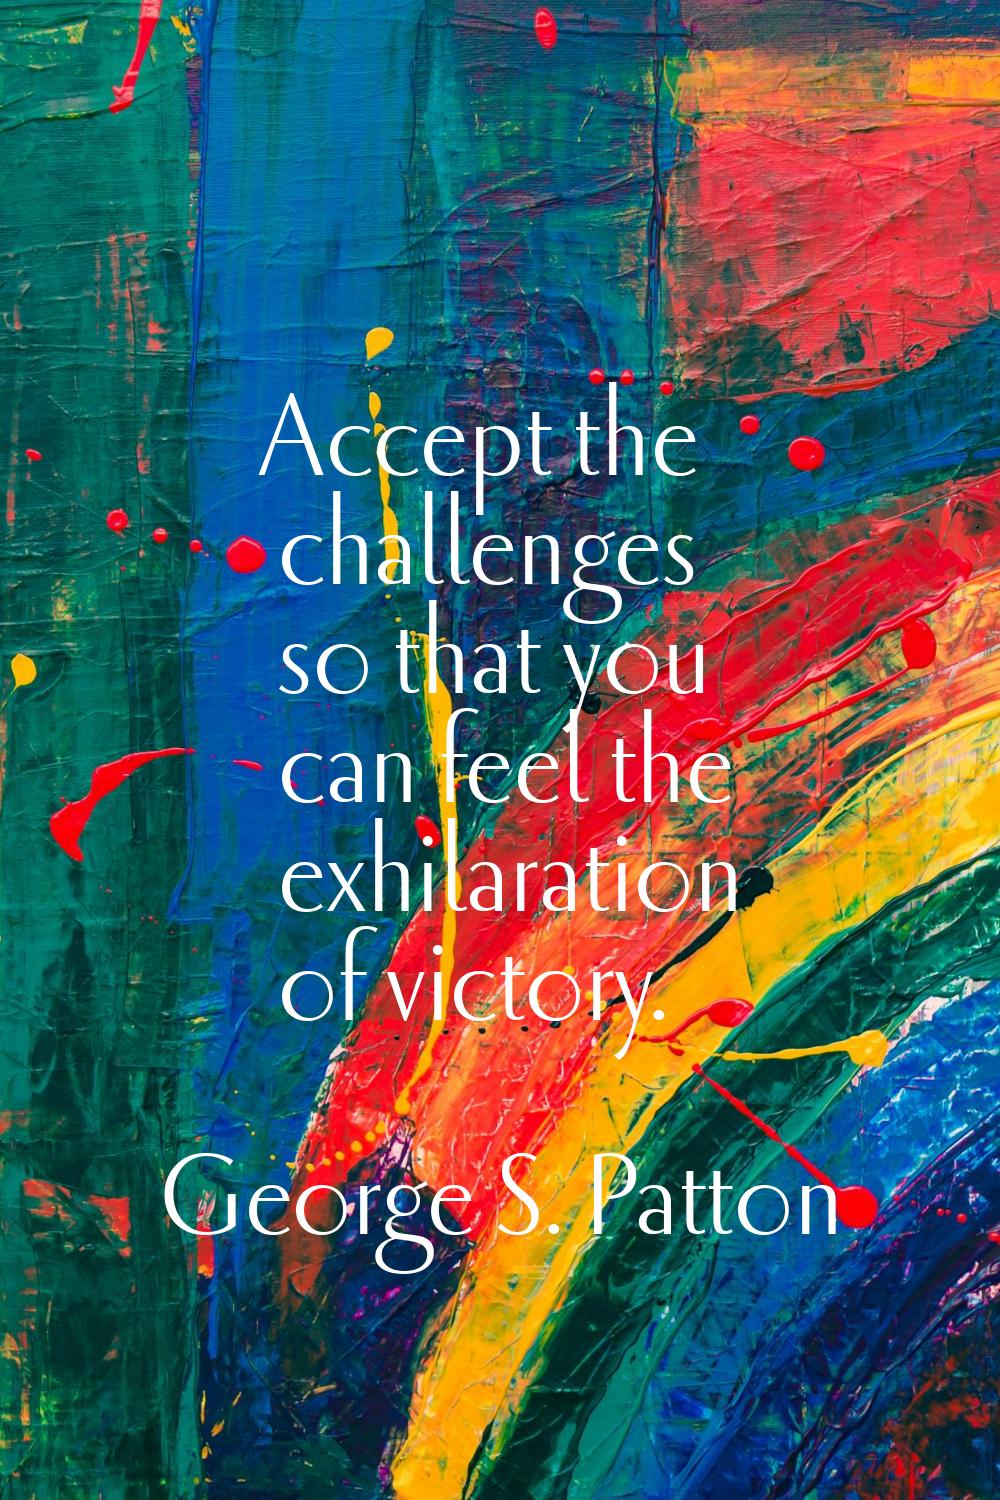 Accept the challenges so that you can feel the exhilaration of victory.